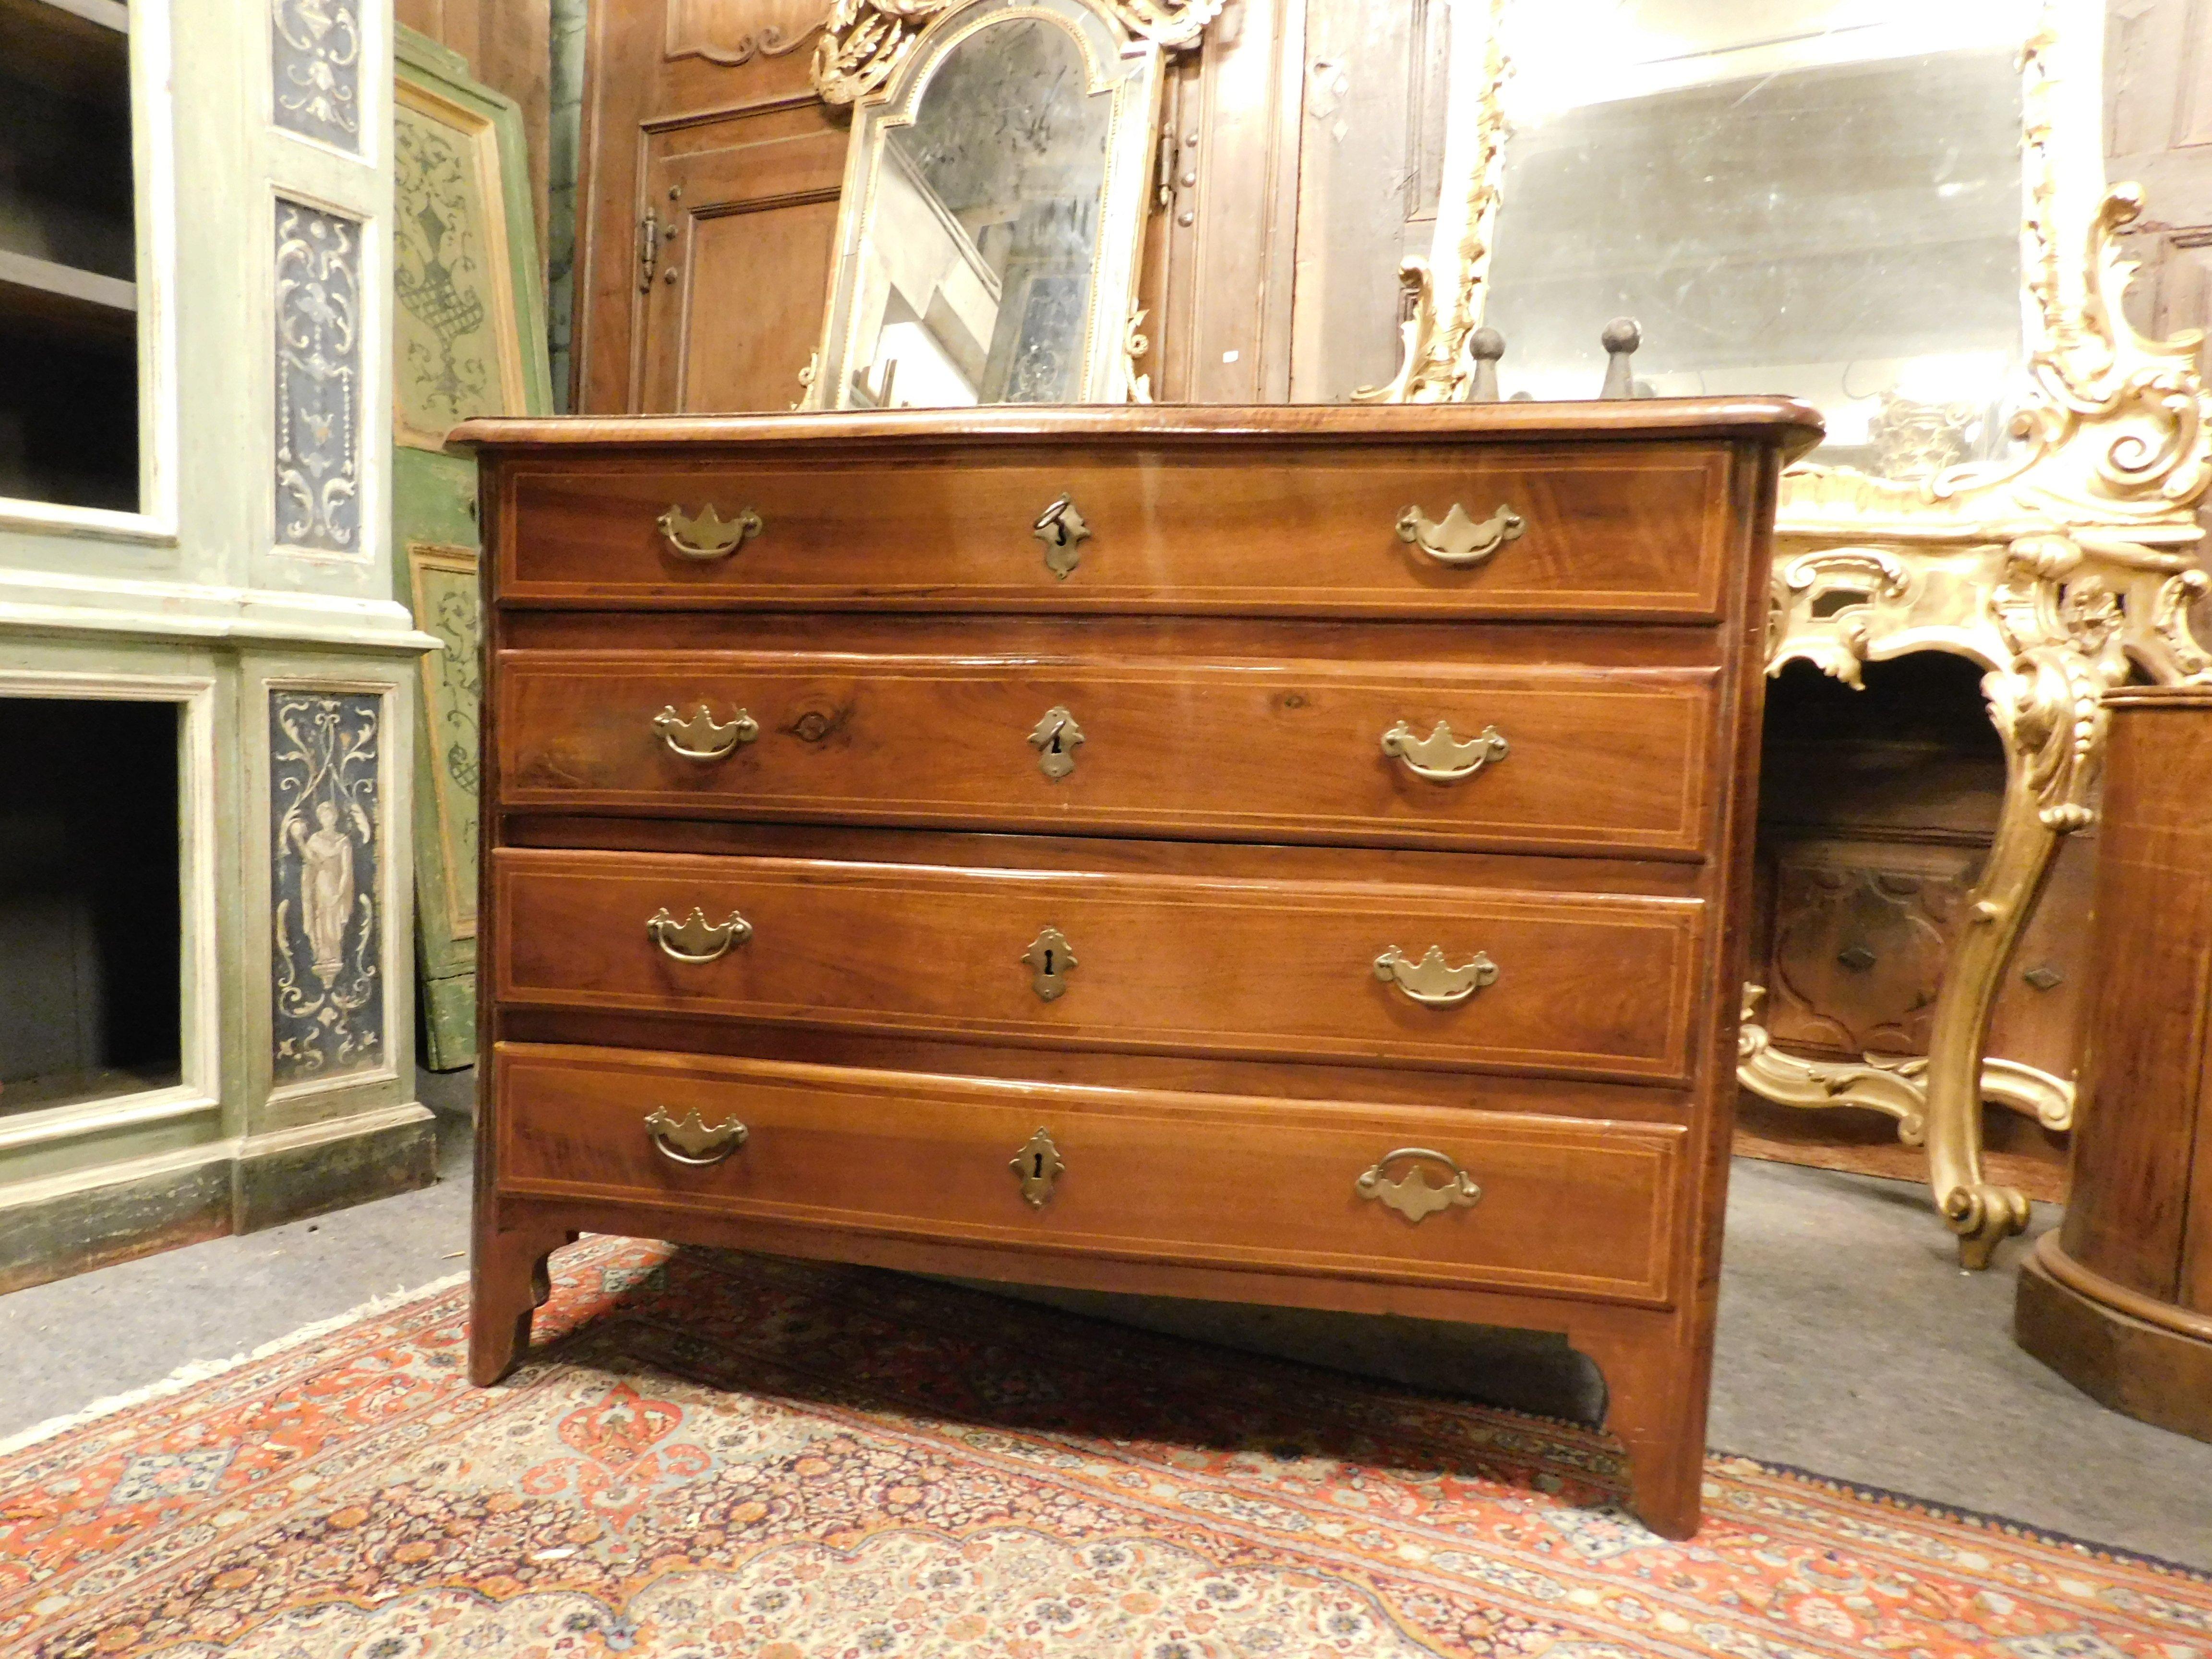 ancient chest of drawers, walnut chest of drawers, richly veneered and inlaid, with wavy drawers typical of the late Baroque, was created to be placed in an ancient bedroom, hand-built by a craftsman of the time in Italy (from Piedmont), original